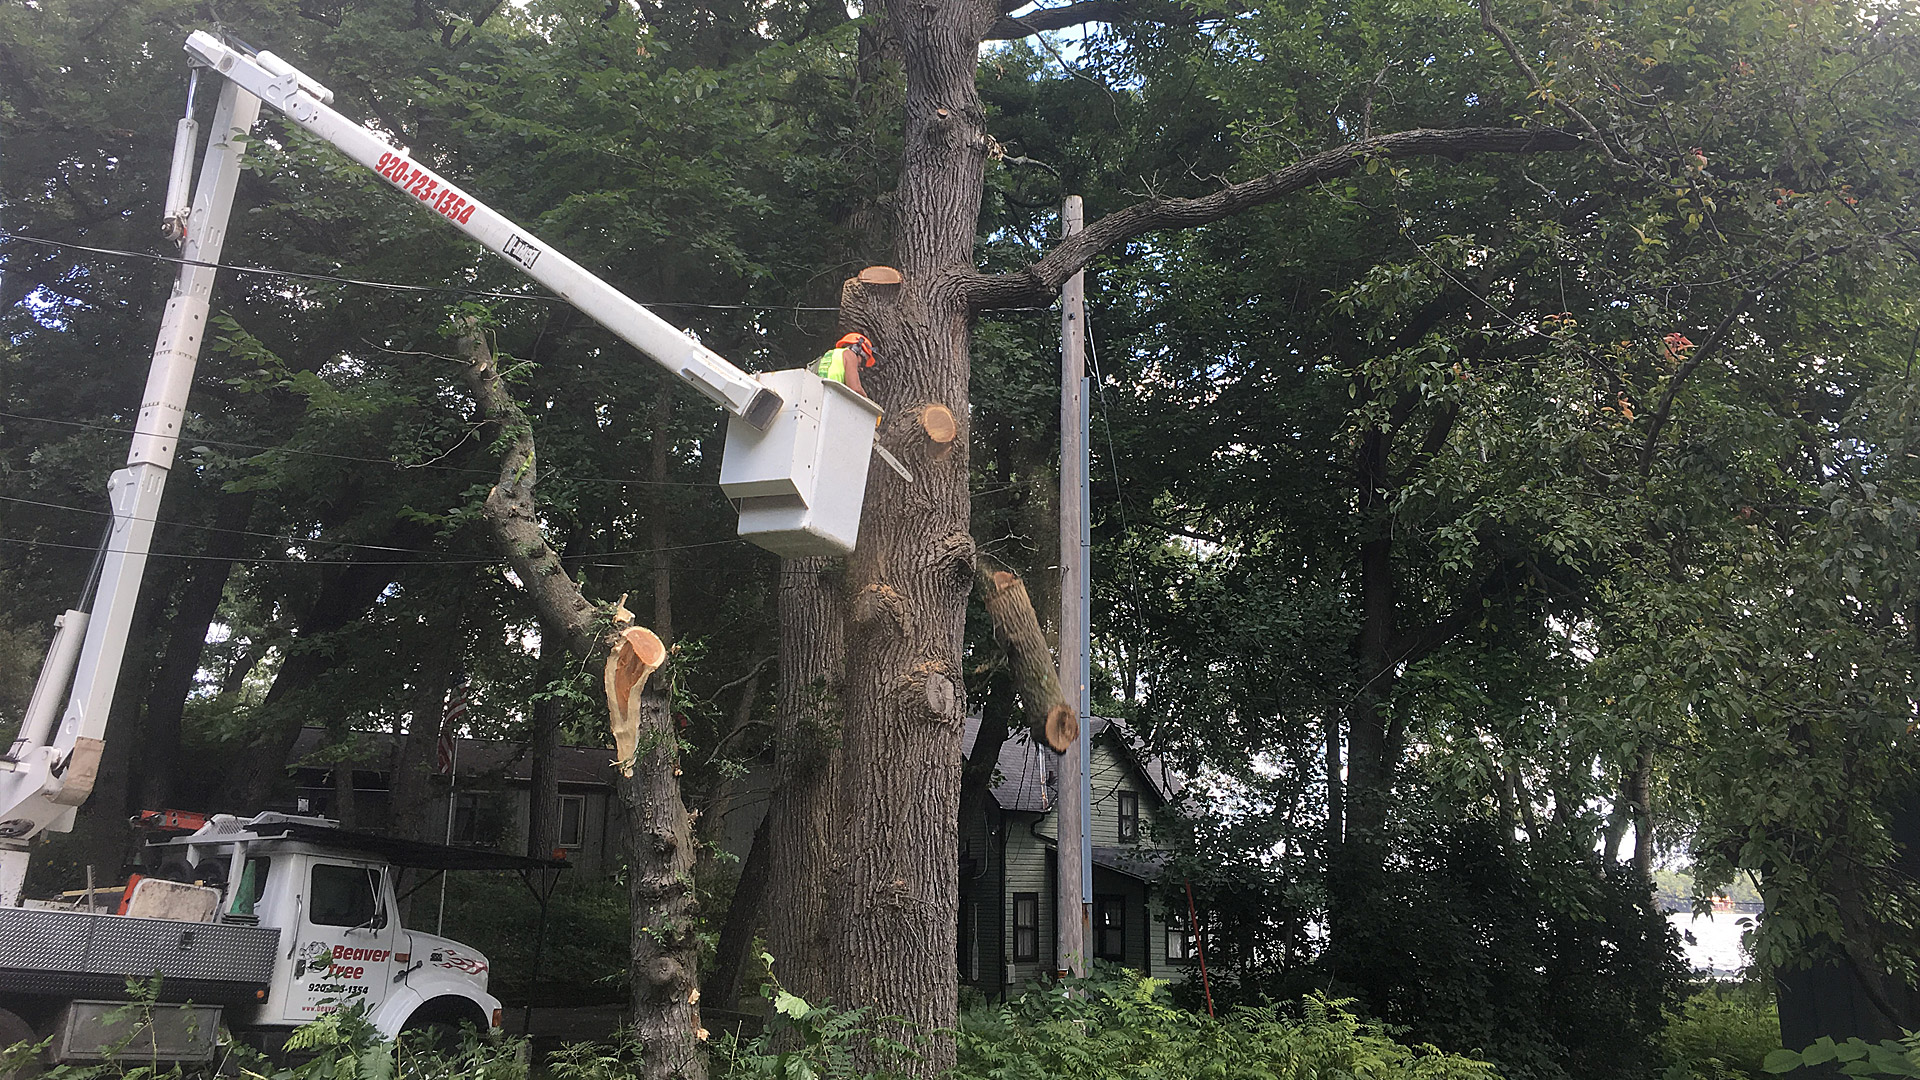 Commercial tree removal services